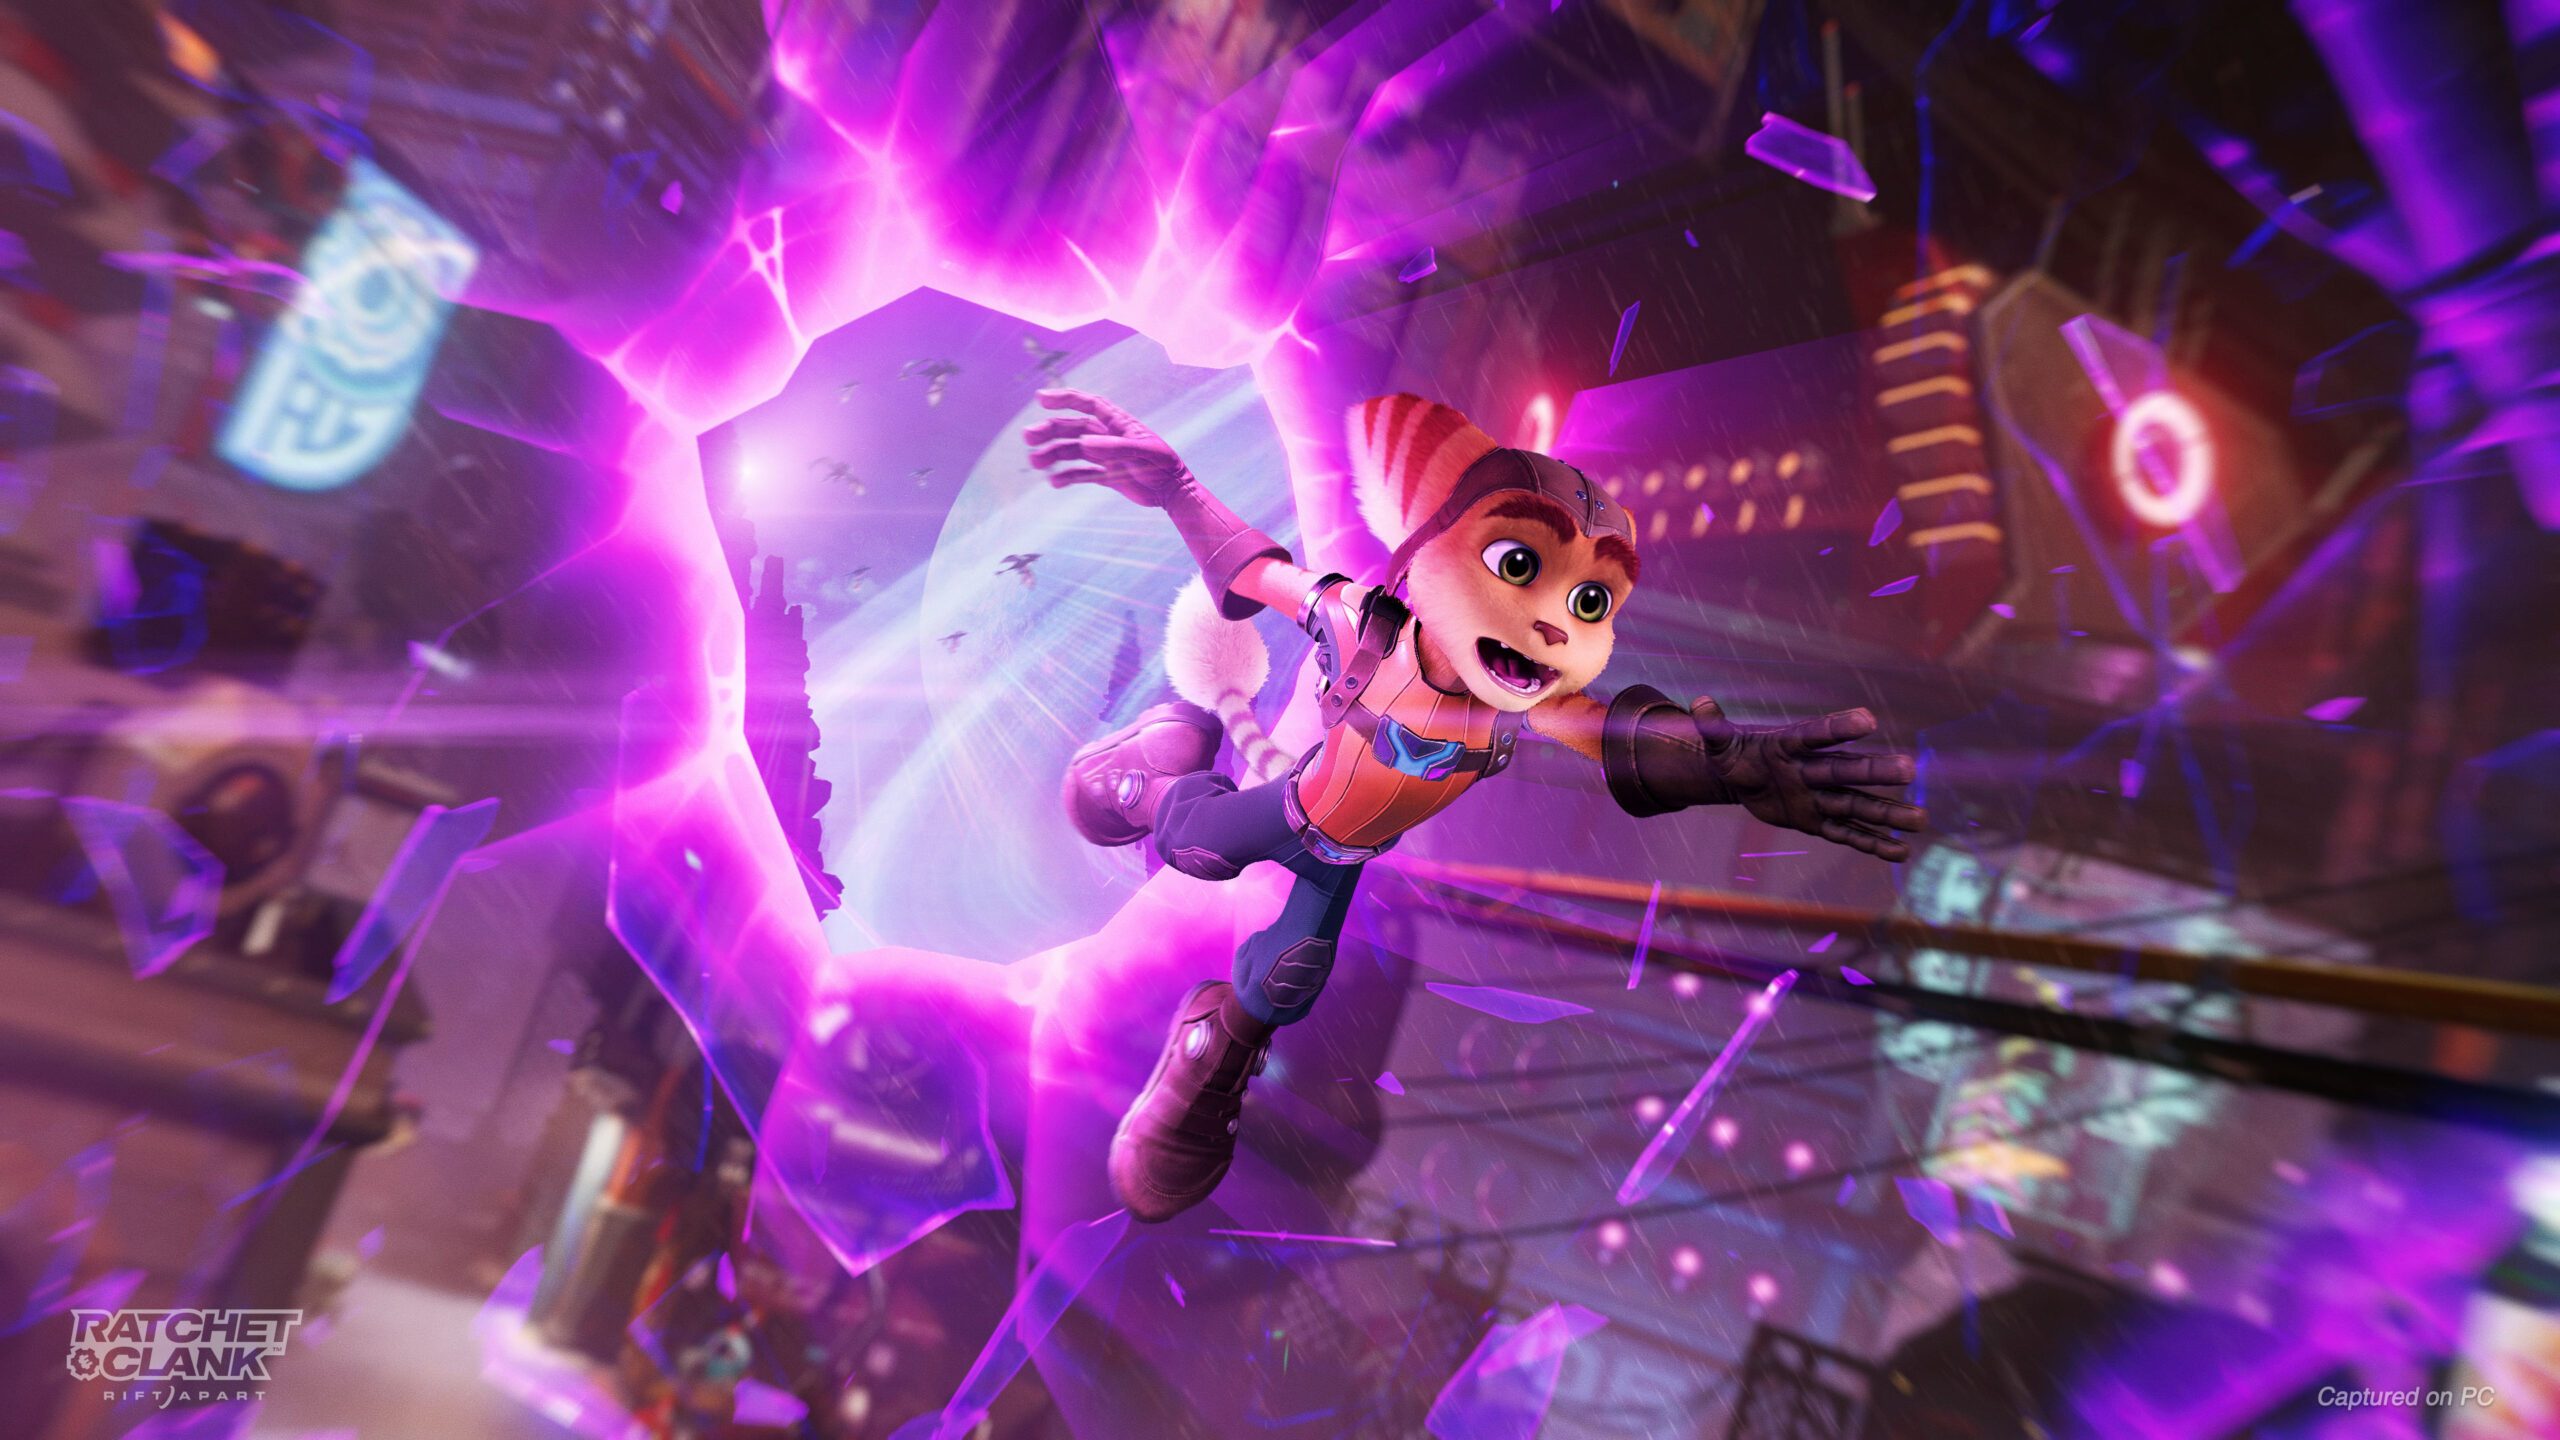 Ratchet & Clank: Rift Apart joins PlayStation Plus in May 2023